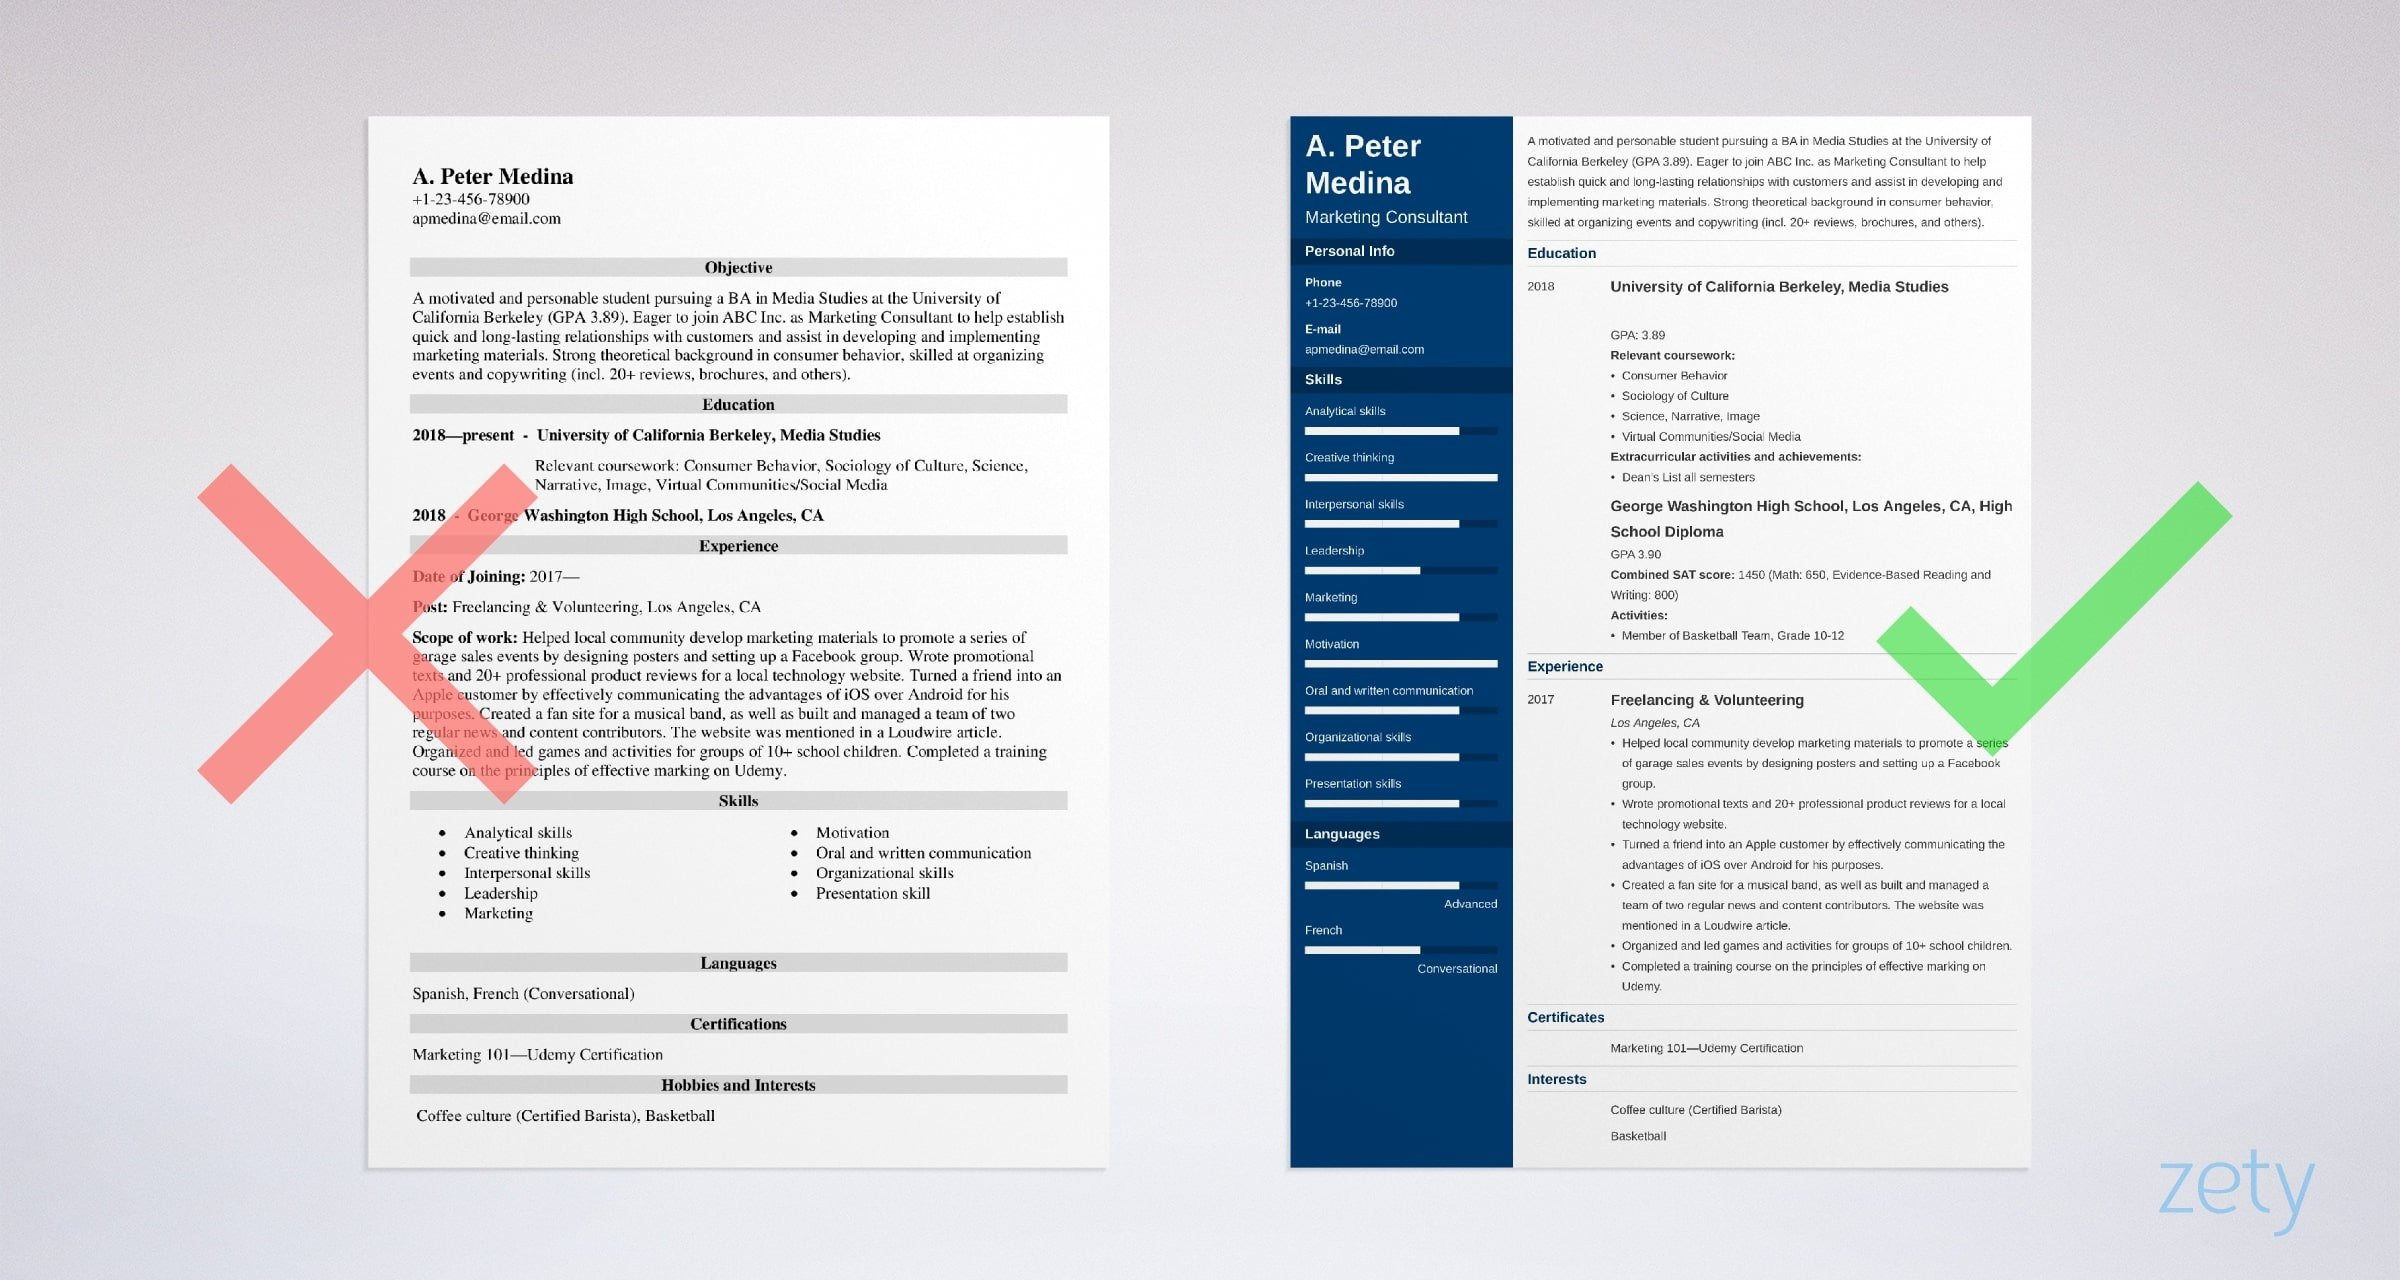 Free Resume Templates with No Work Experience How to Write A Resume with No Experience & Get the First Job